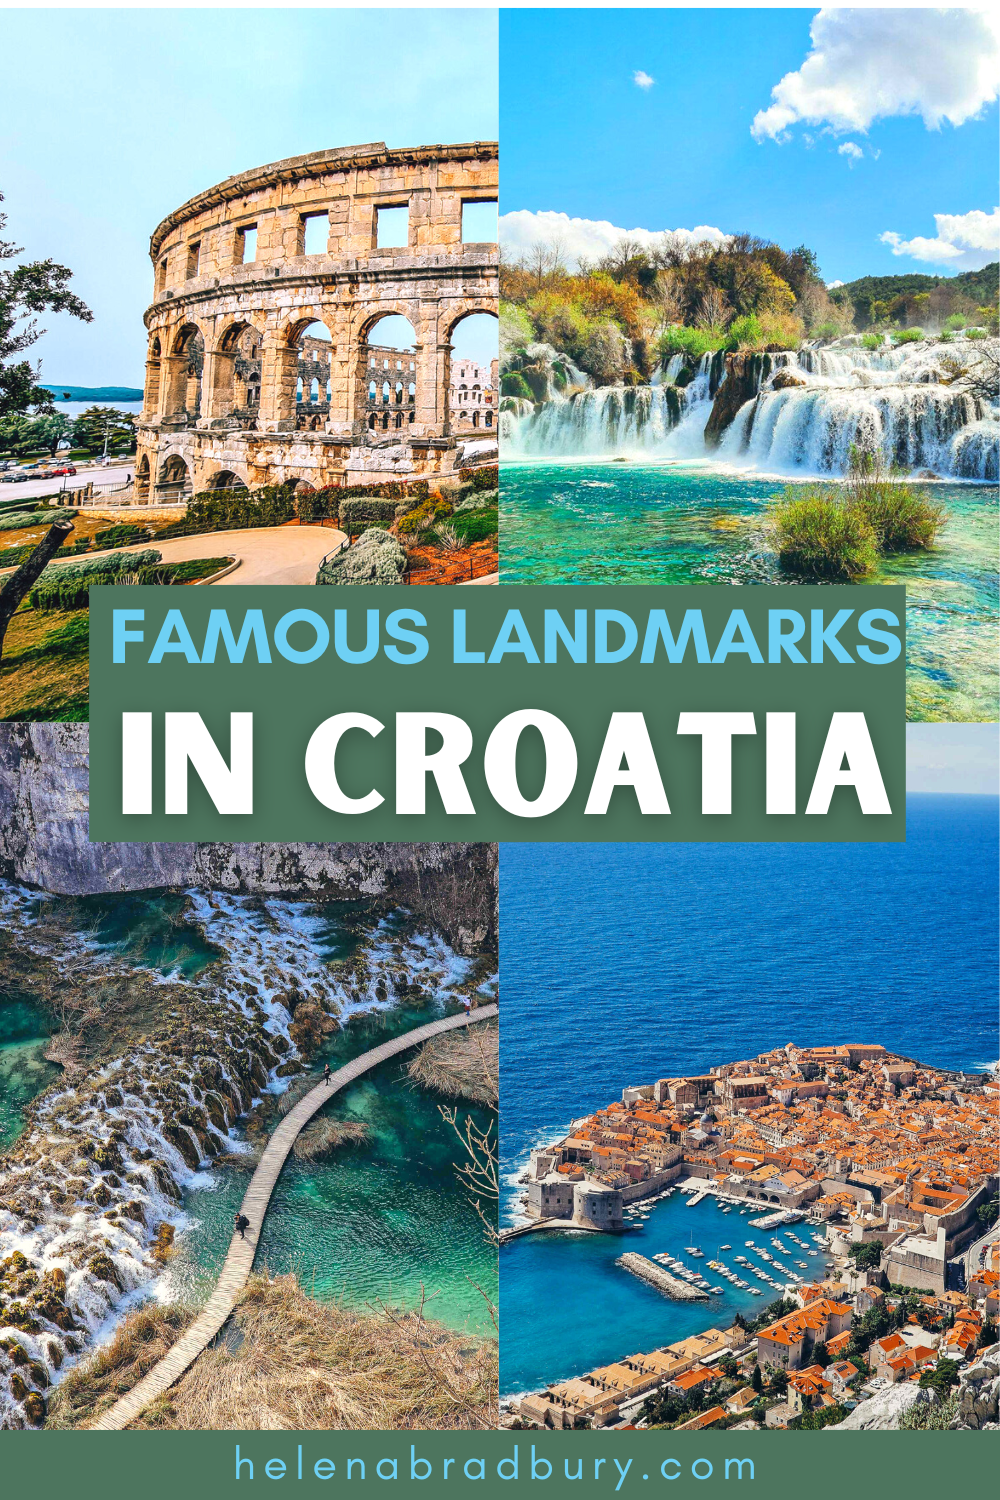 25 of the most famous landmarks in Croatia and places to visit in Croatia that should be on your bucket list! | most beautiful places in croatia | croatia beautiful places | croatia landmarks | places to visit in croatia | best places in croatia | be